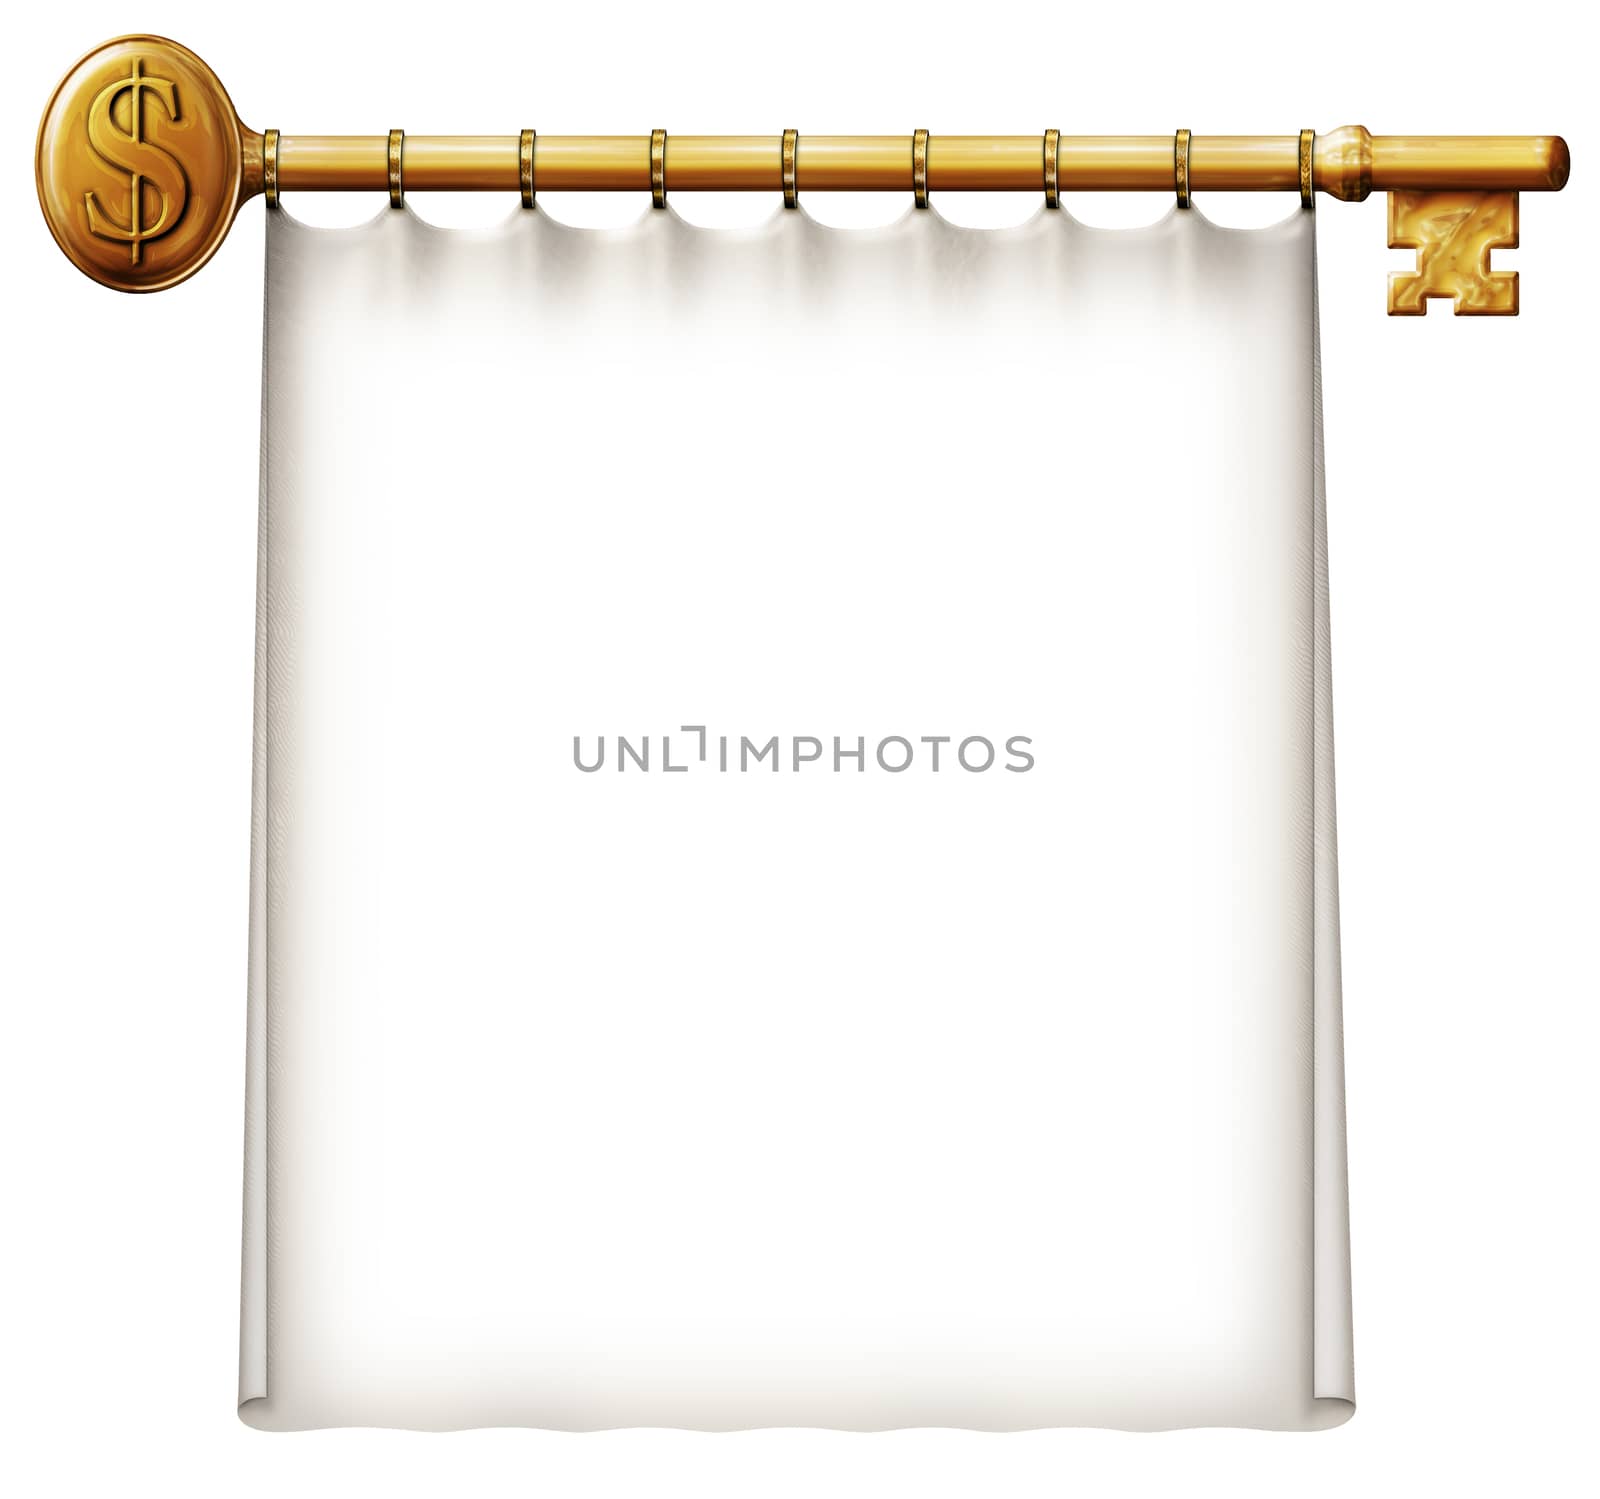 Photo Illustration of a banner hanging on a gold key with a dollar symbol.